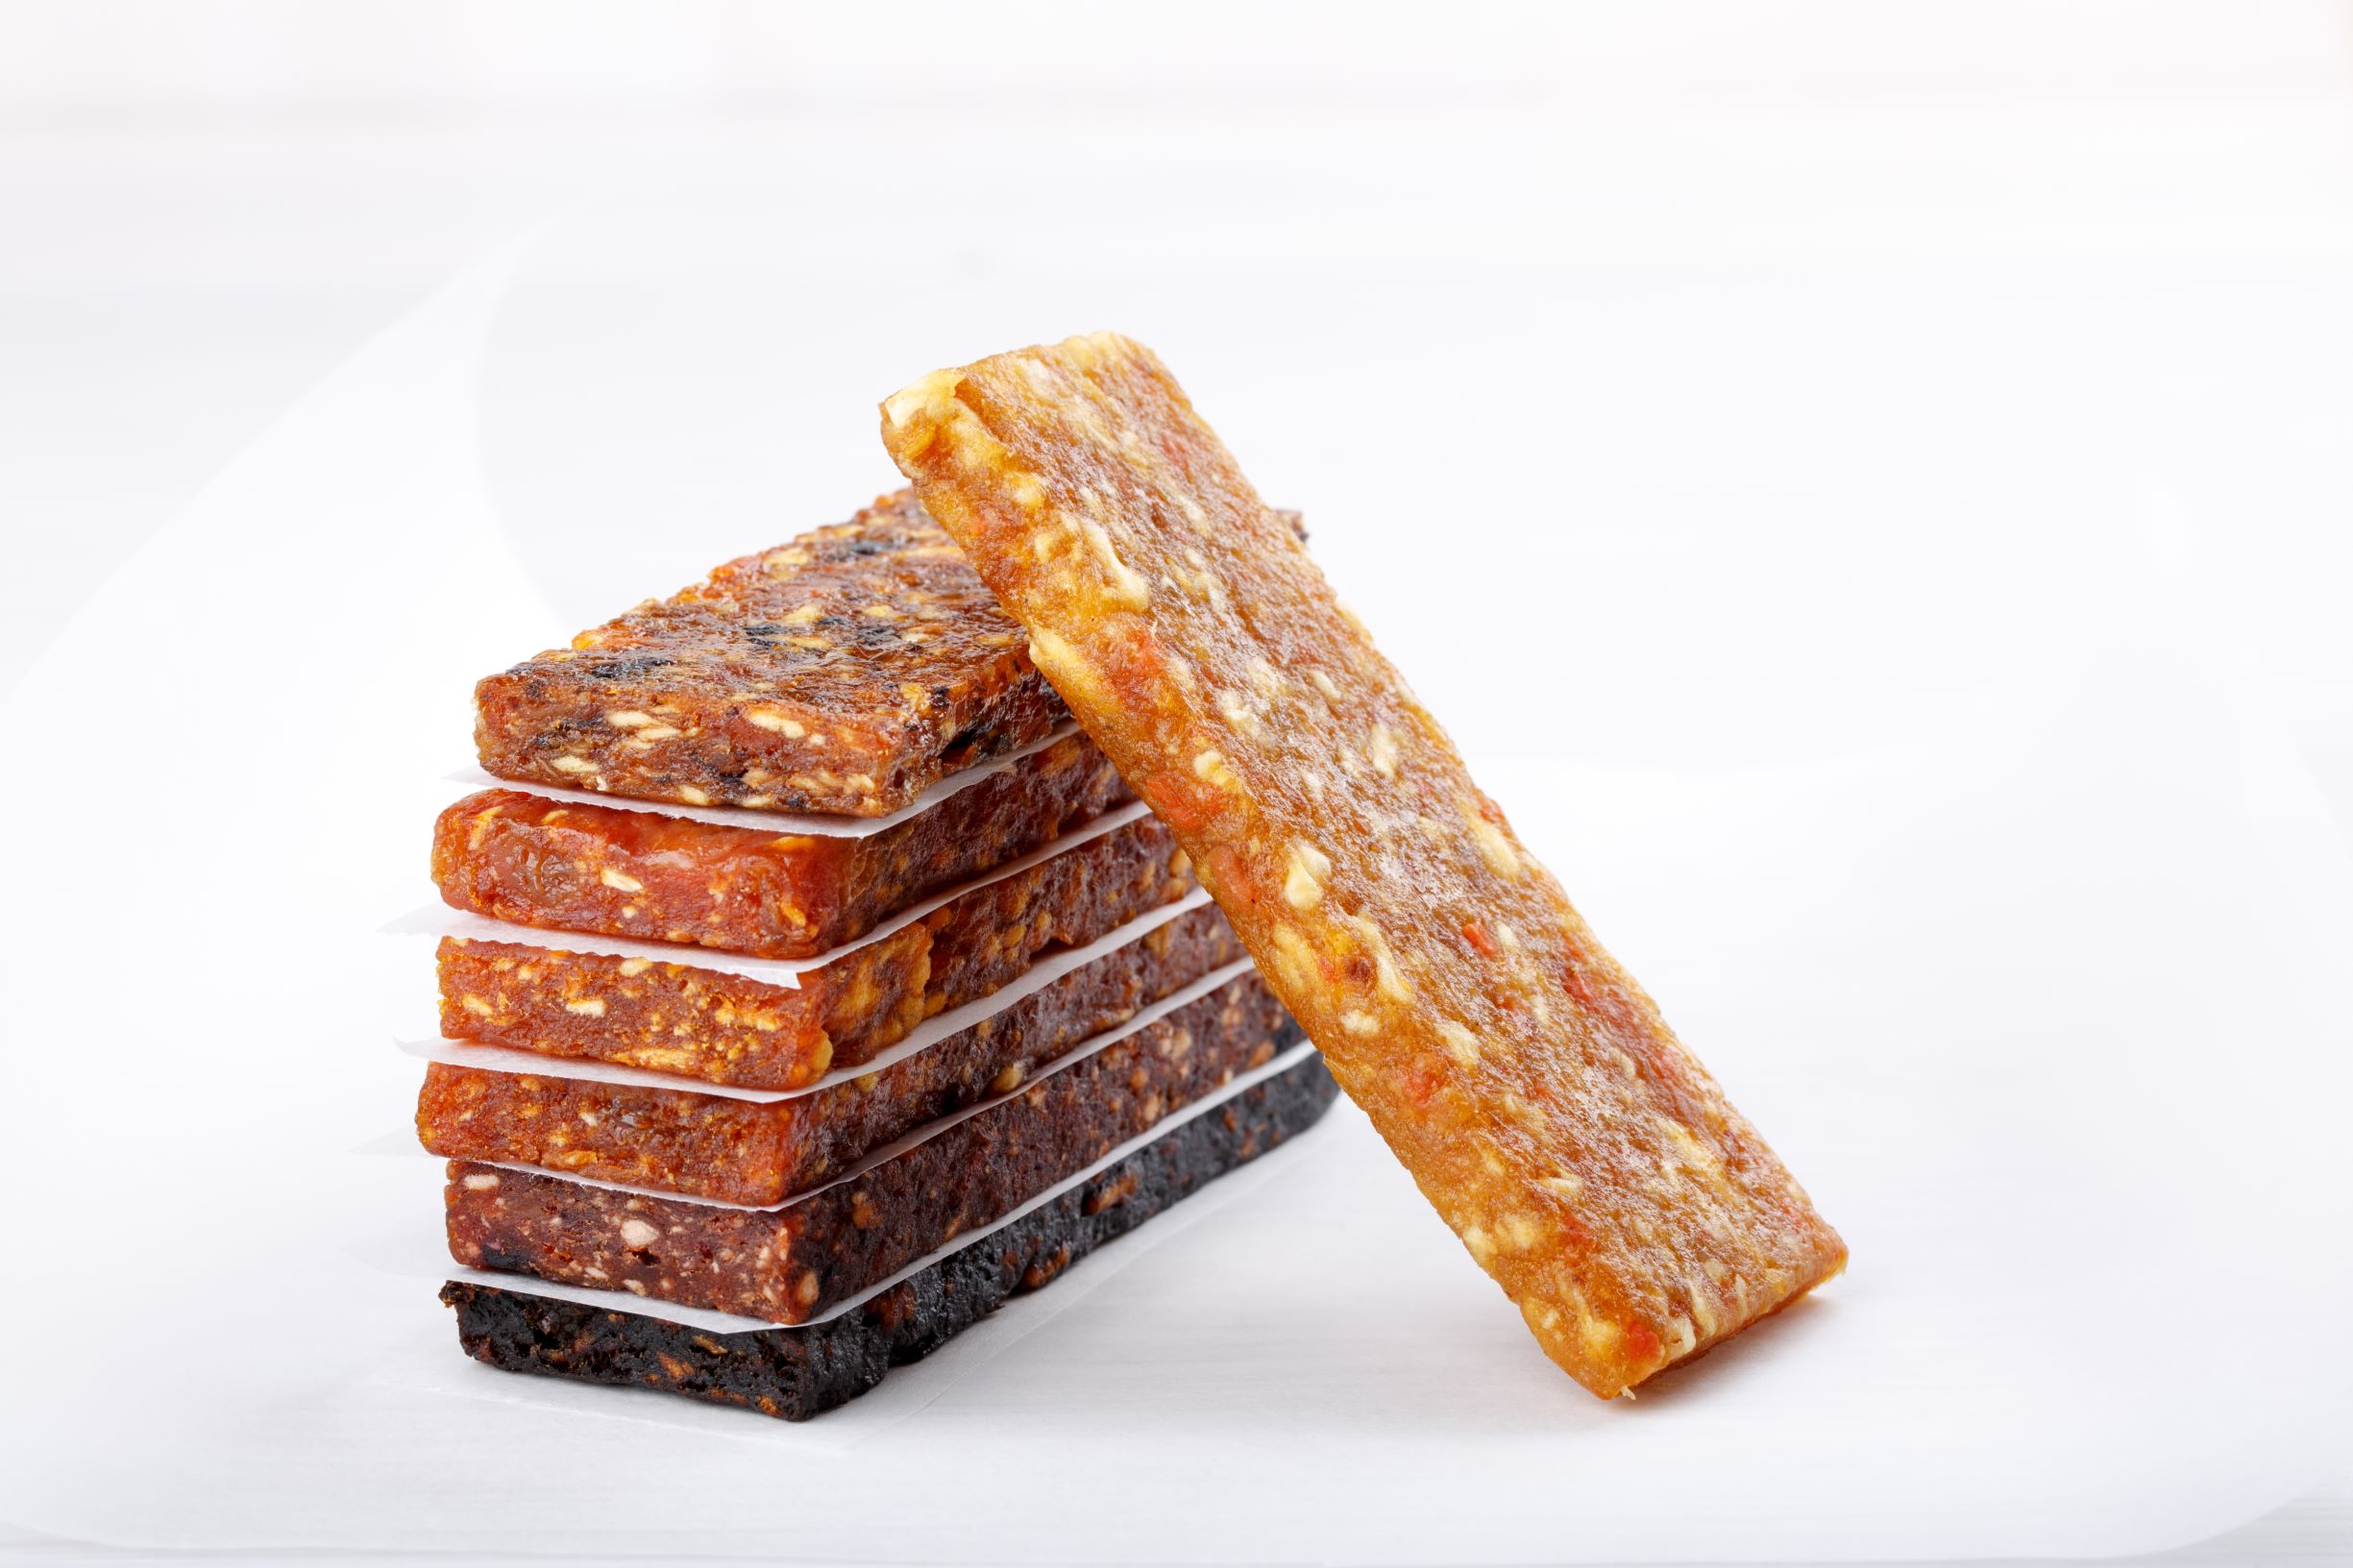 Raw Almond, Nuts and Dried Fruits Energy Bar Recipe